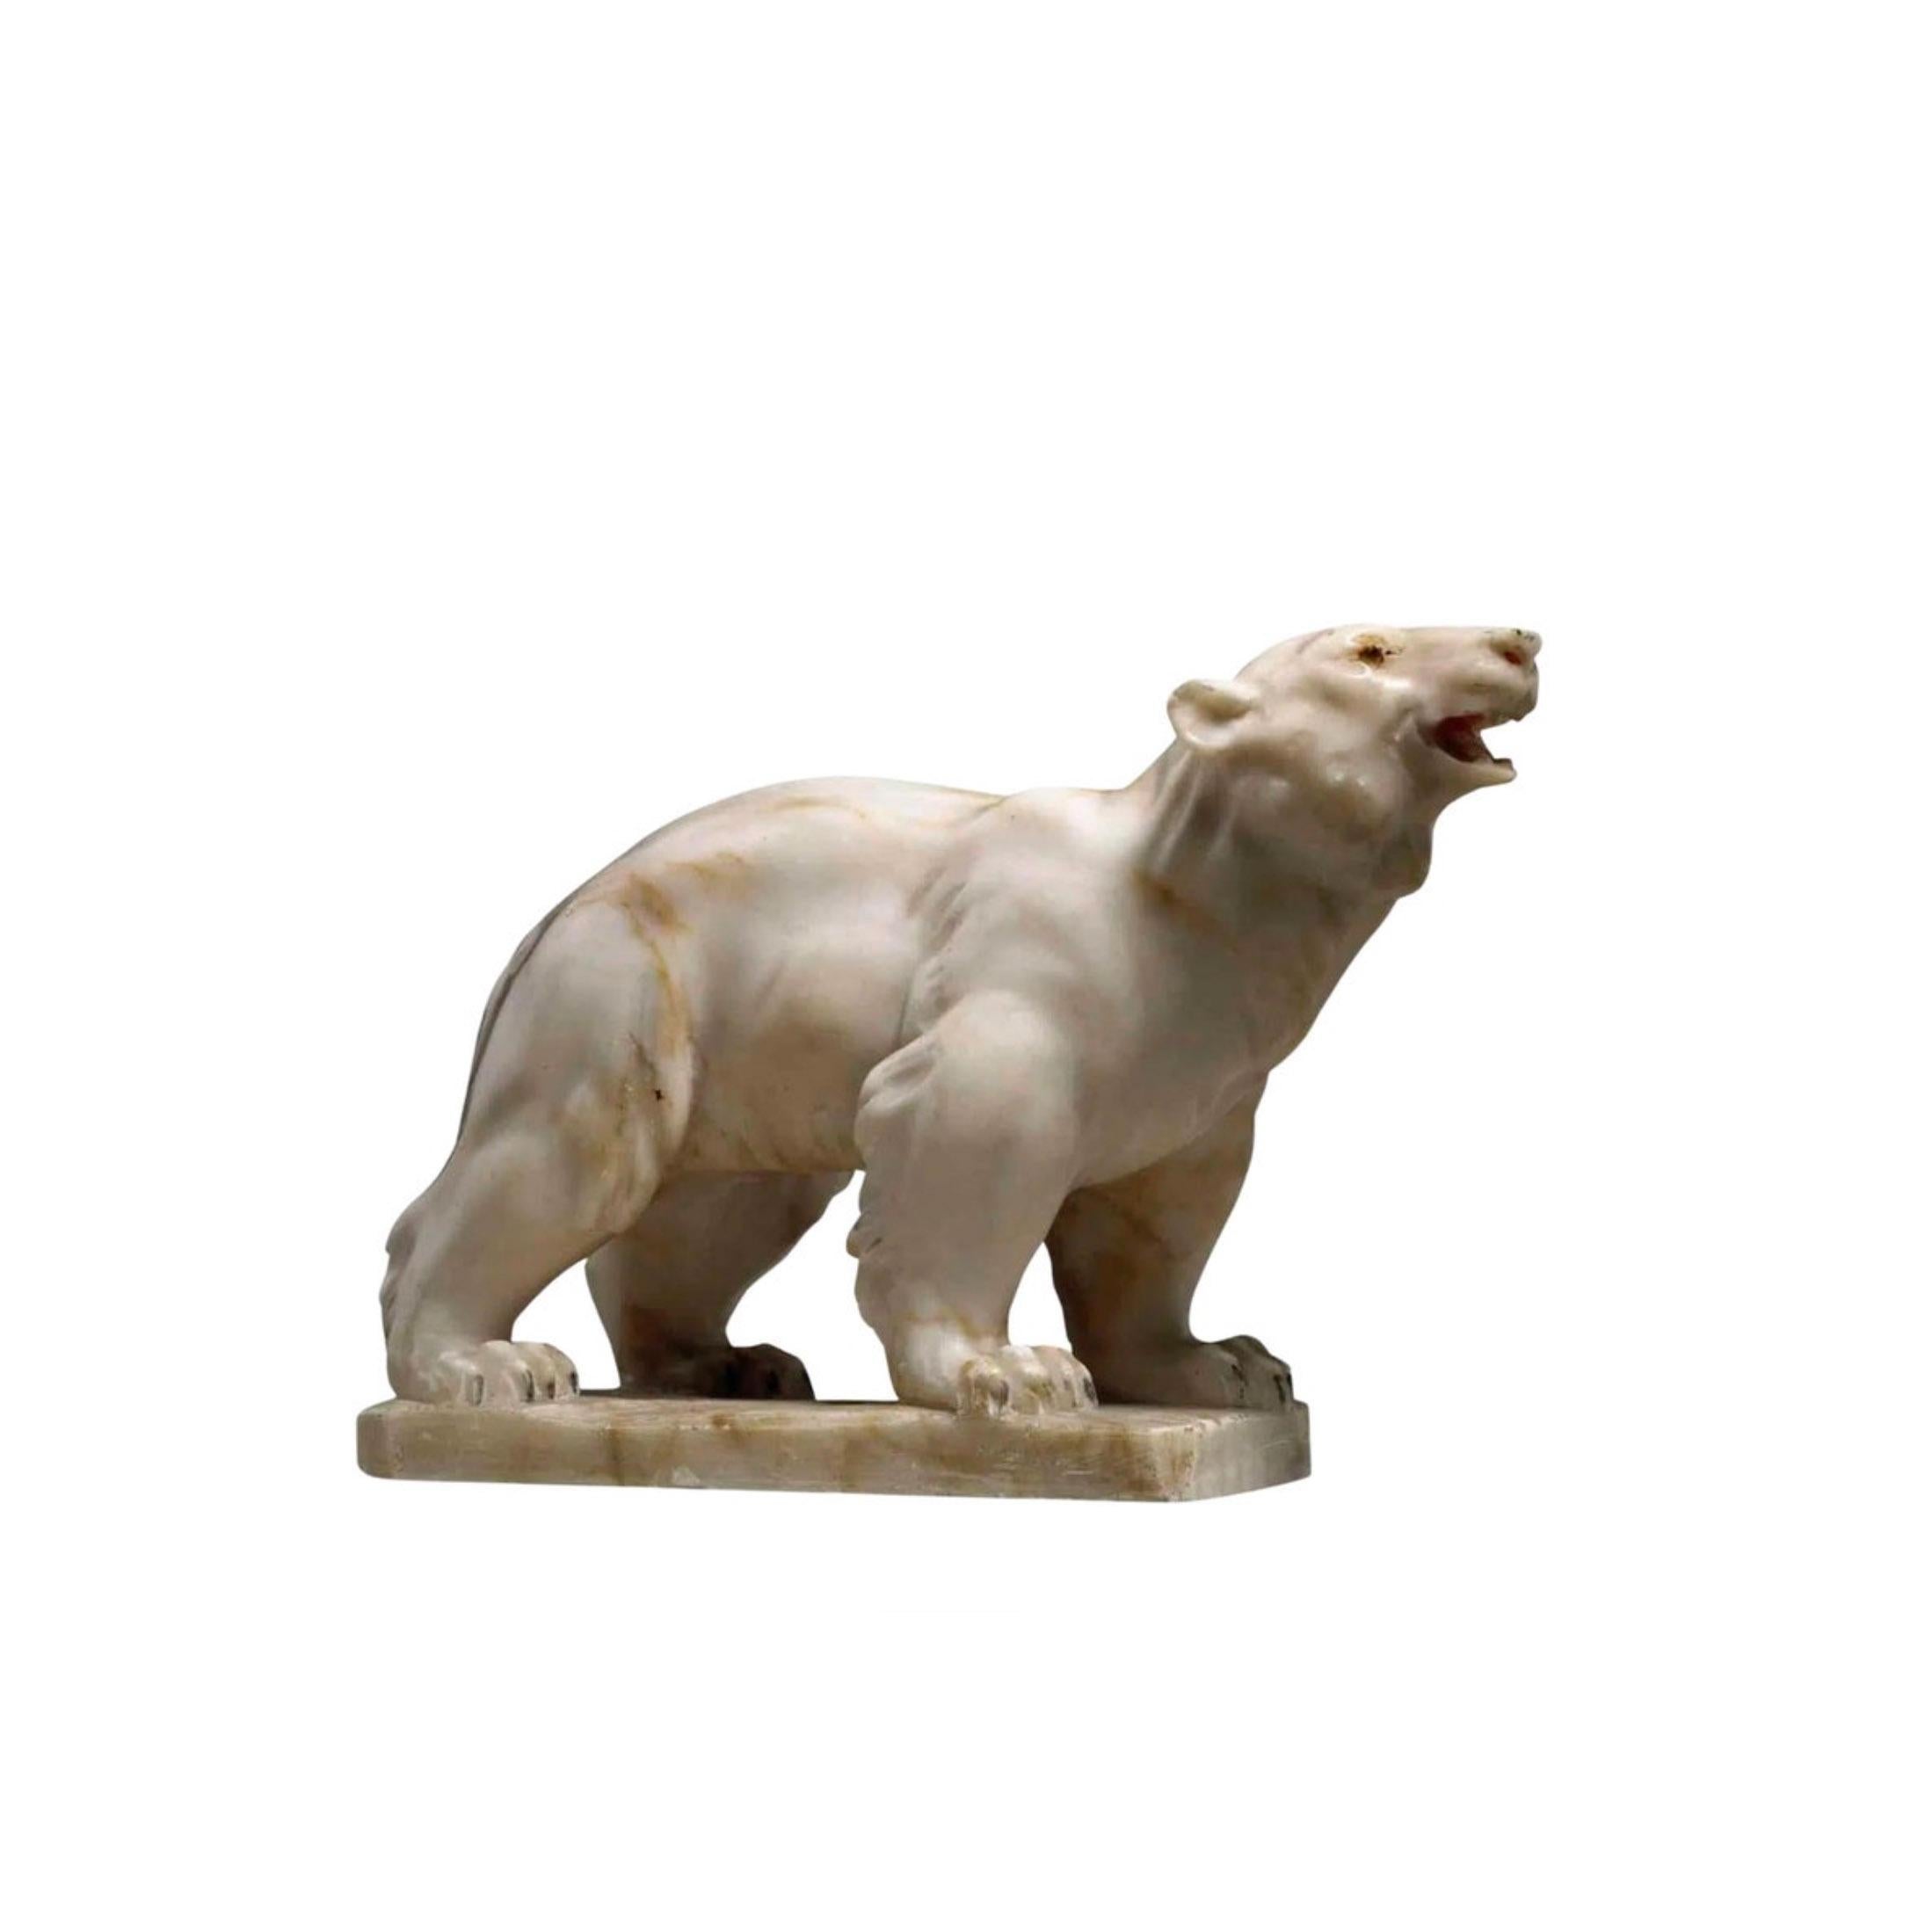 Early 20th Century Alabaster Polar Bear

A fine early 20th century carved alabaster sculpture of a polar bear.

Additional information: 
Origin: France
Period: Circa 1925, 20th Century
Style: Animaliers
Dimensions:
Depth: 10 cm (3.94 inches)
Height: